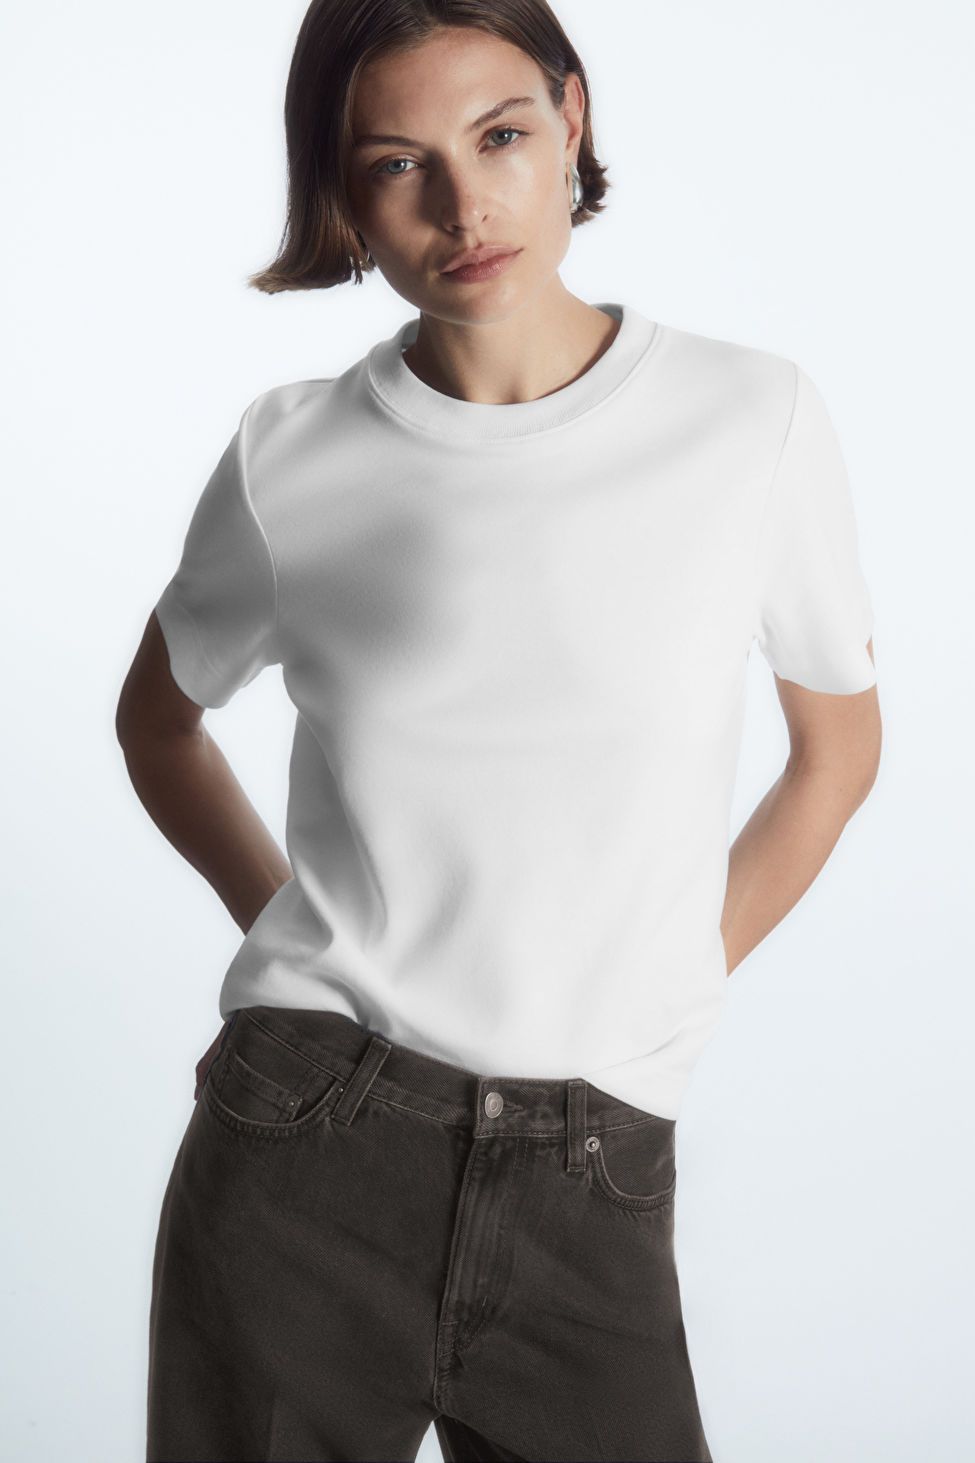 THE CLEAN CUT T-SHIRT - White - T-shirts - COS | COS (US)